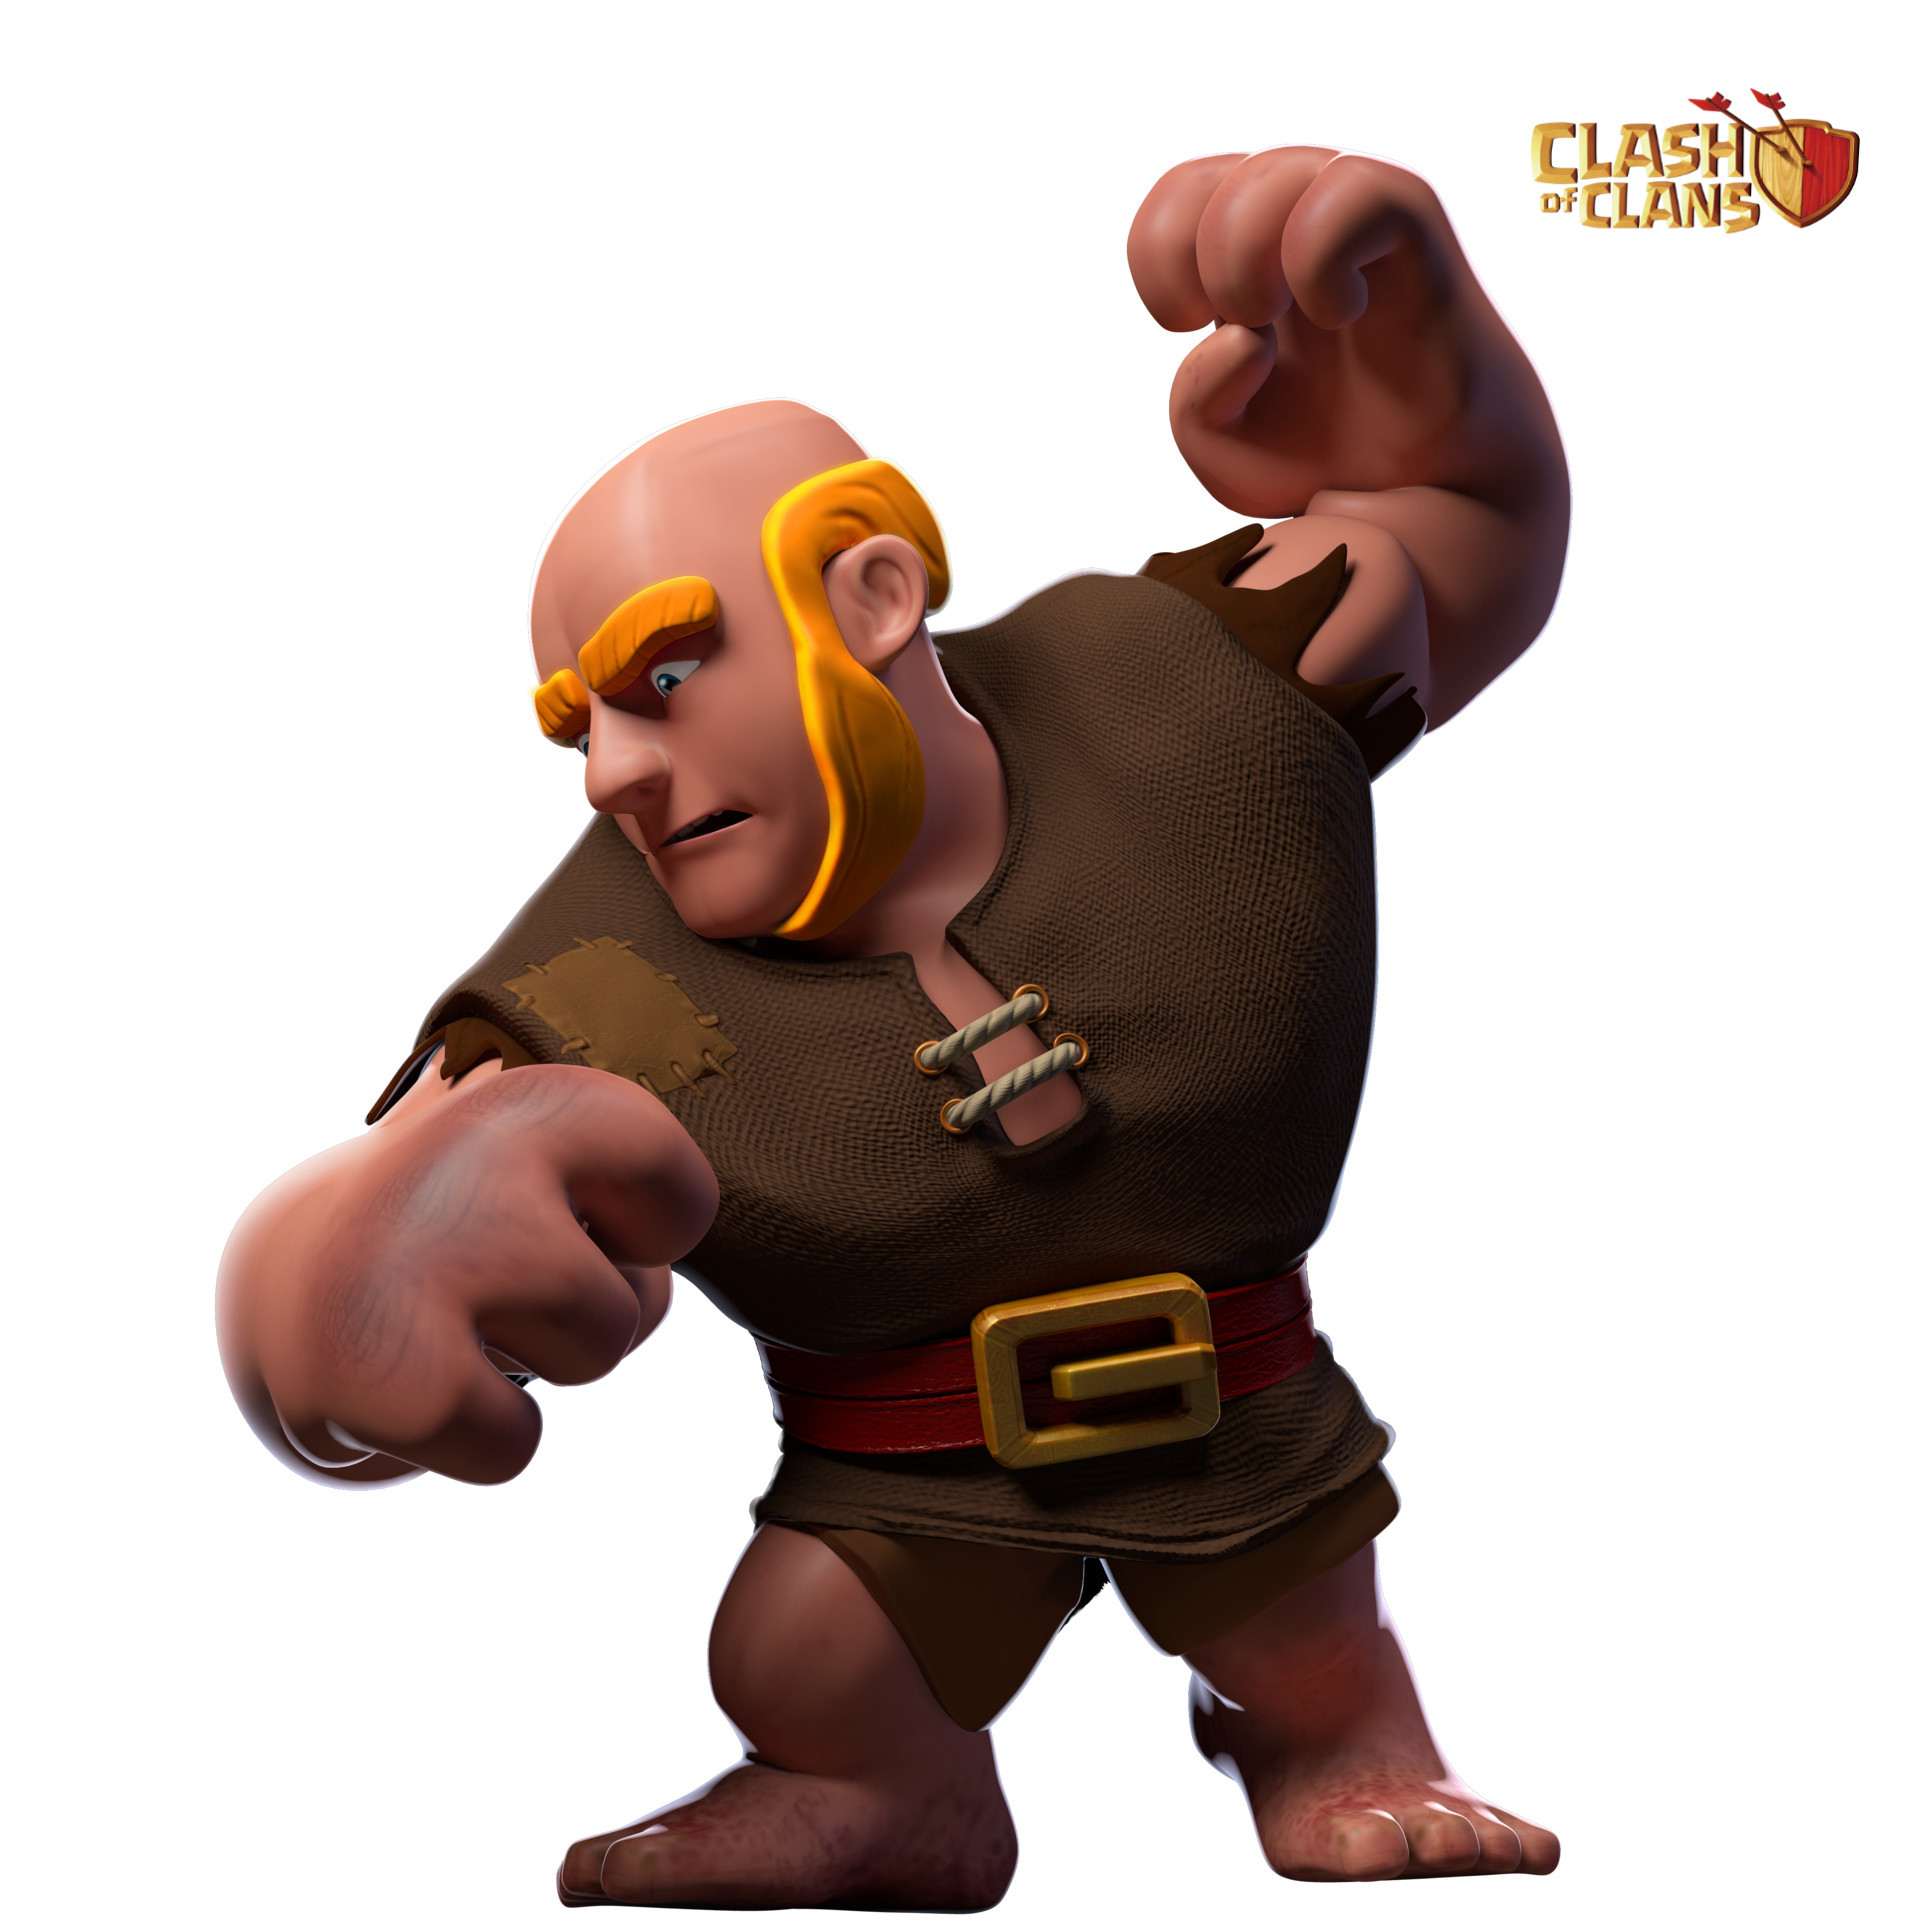 Giant Clash Of Clans - HD Wallpaper 